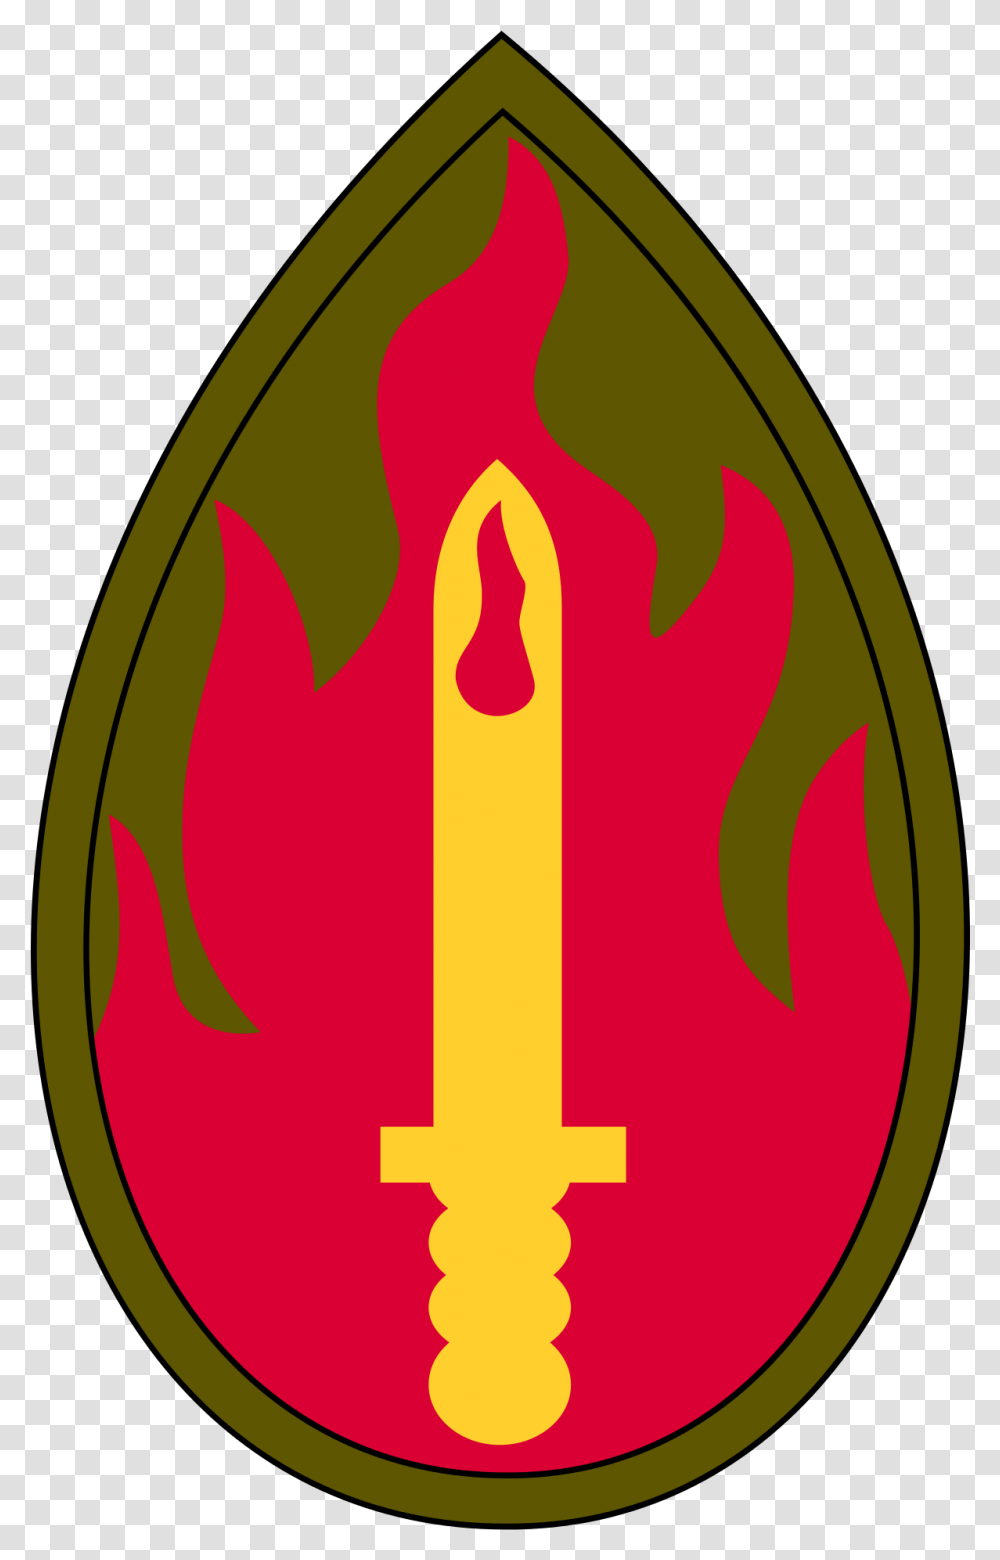 Fire Magic Circle Image 63rd Infantry Division, Label, Text, Armor, Shield Transparent Png